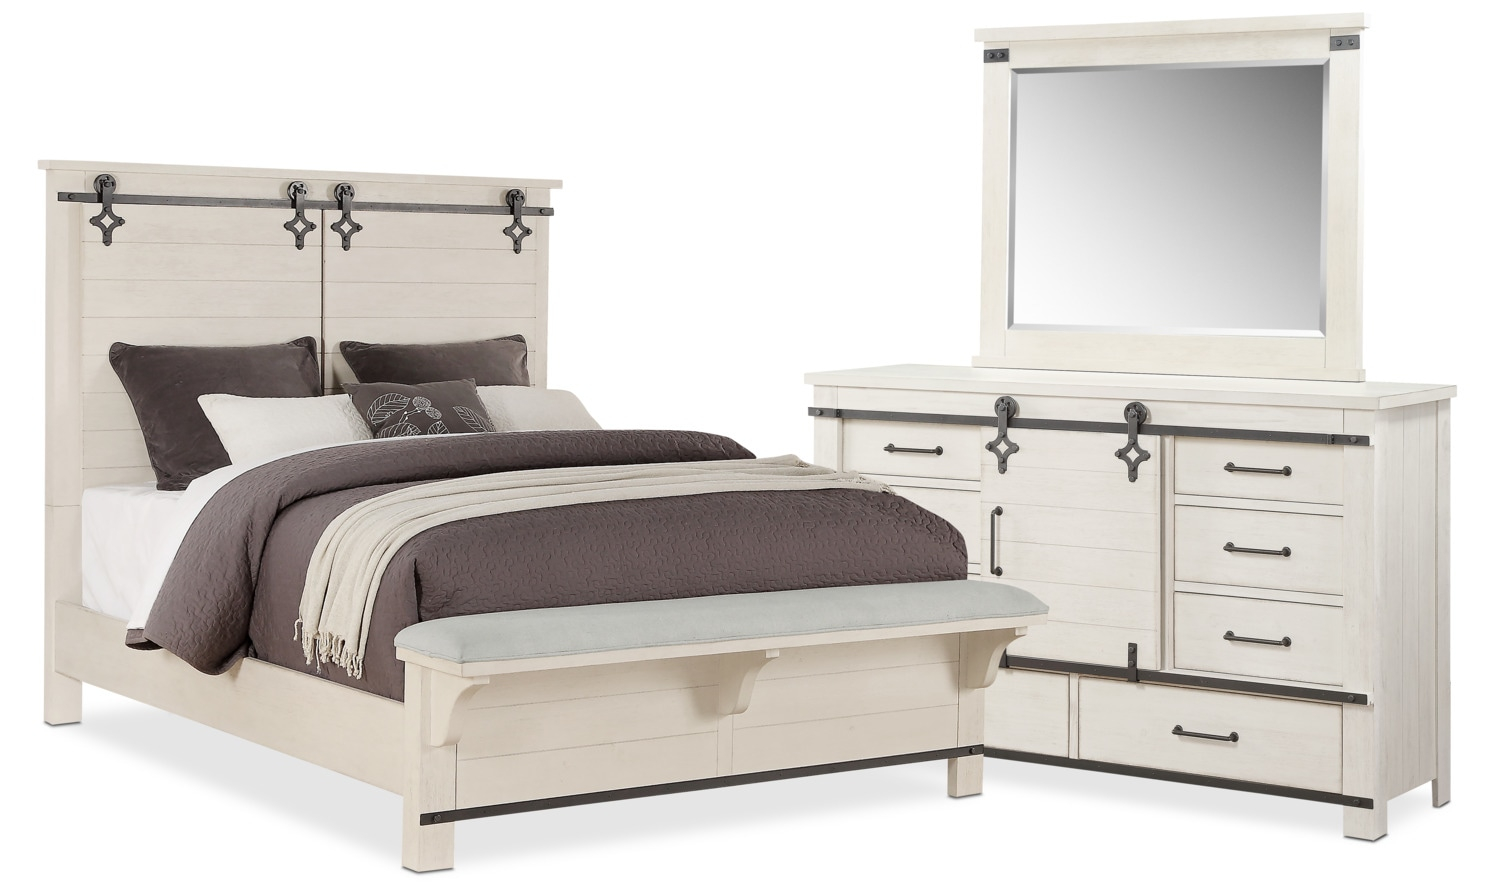 Founders Mill 5 Piece Bedroom Set With Dresser And Mirror pertaining to dimensions 1500 X 892